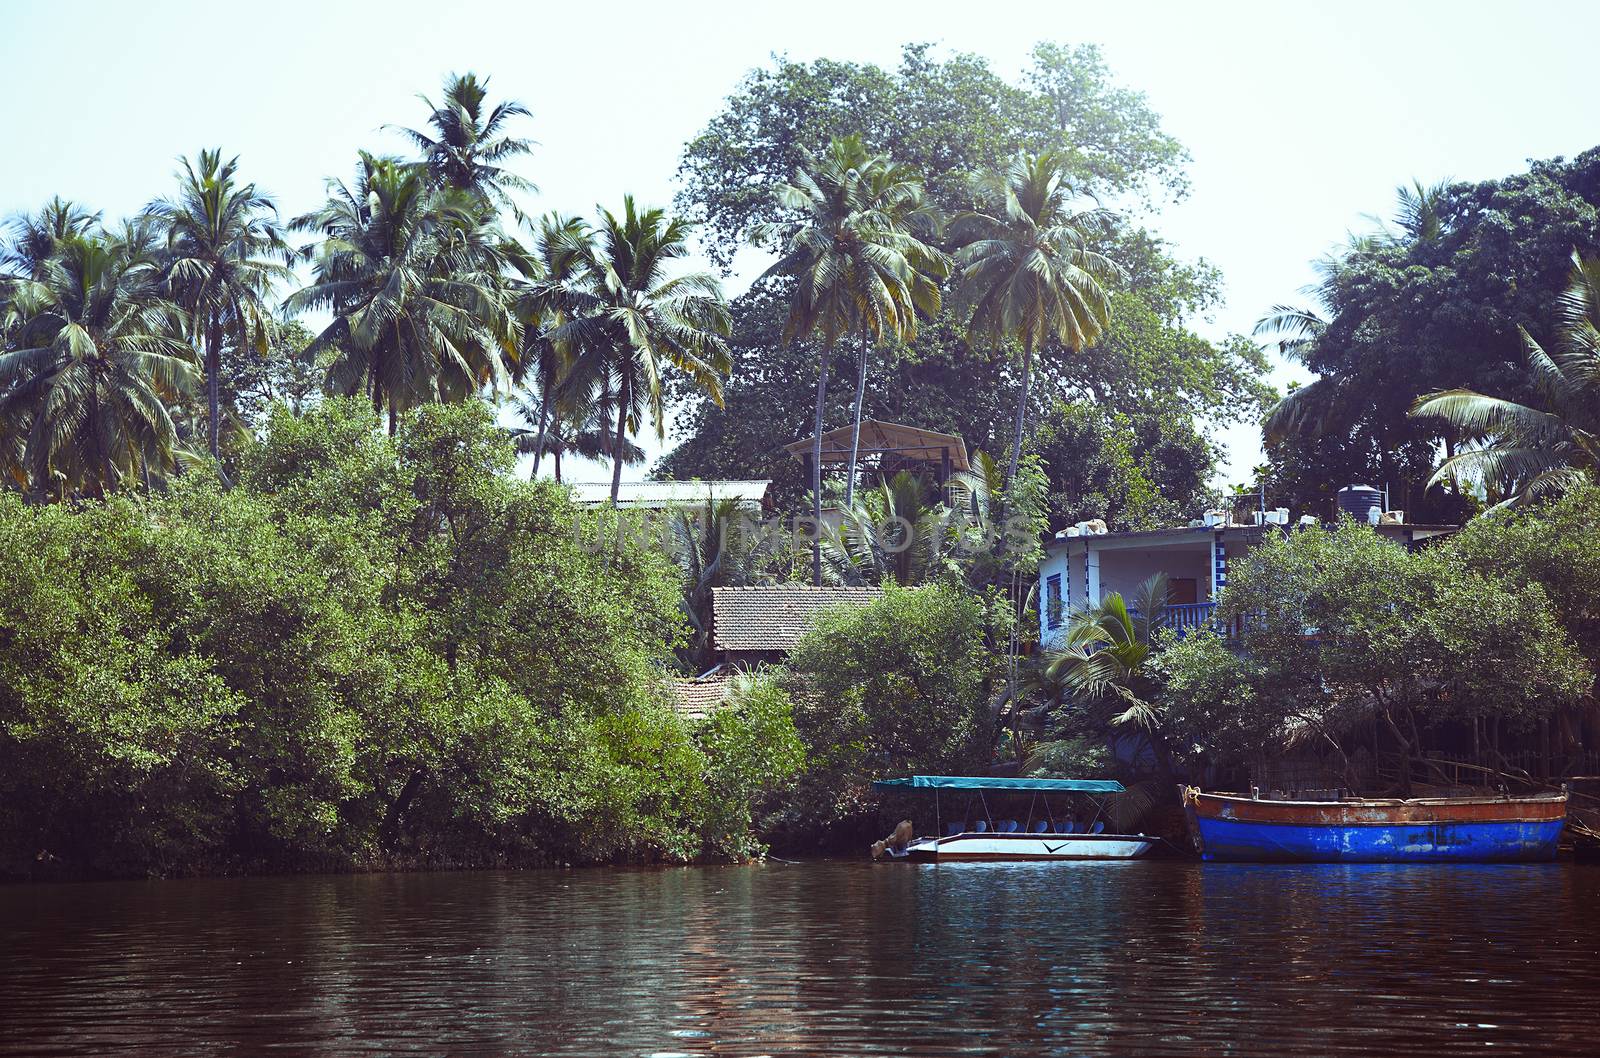 Fishing boats at the pier in palm jungles. Goa, India